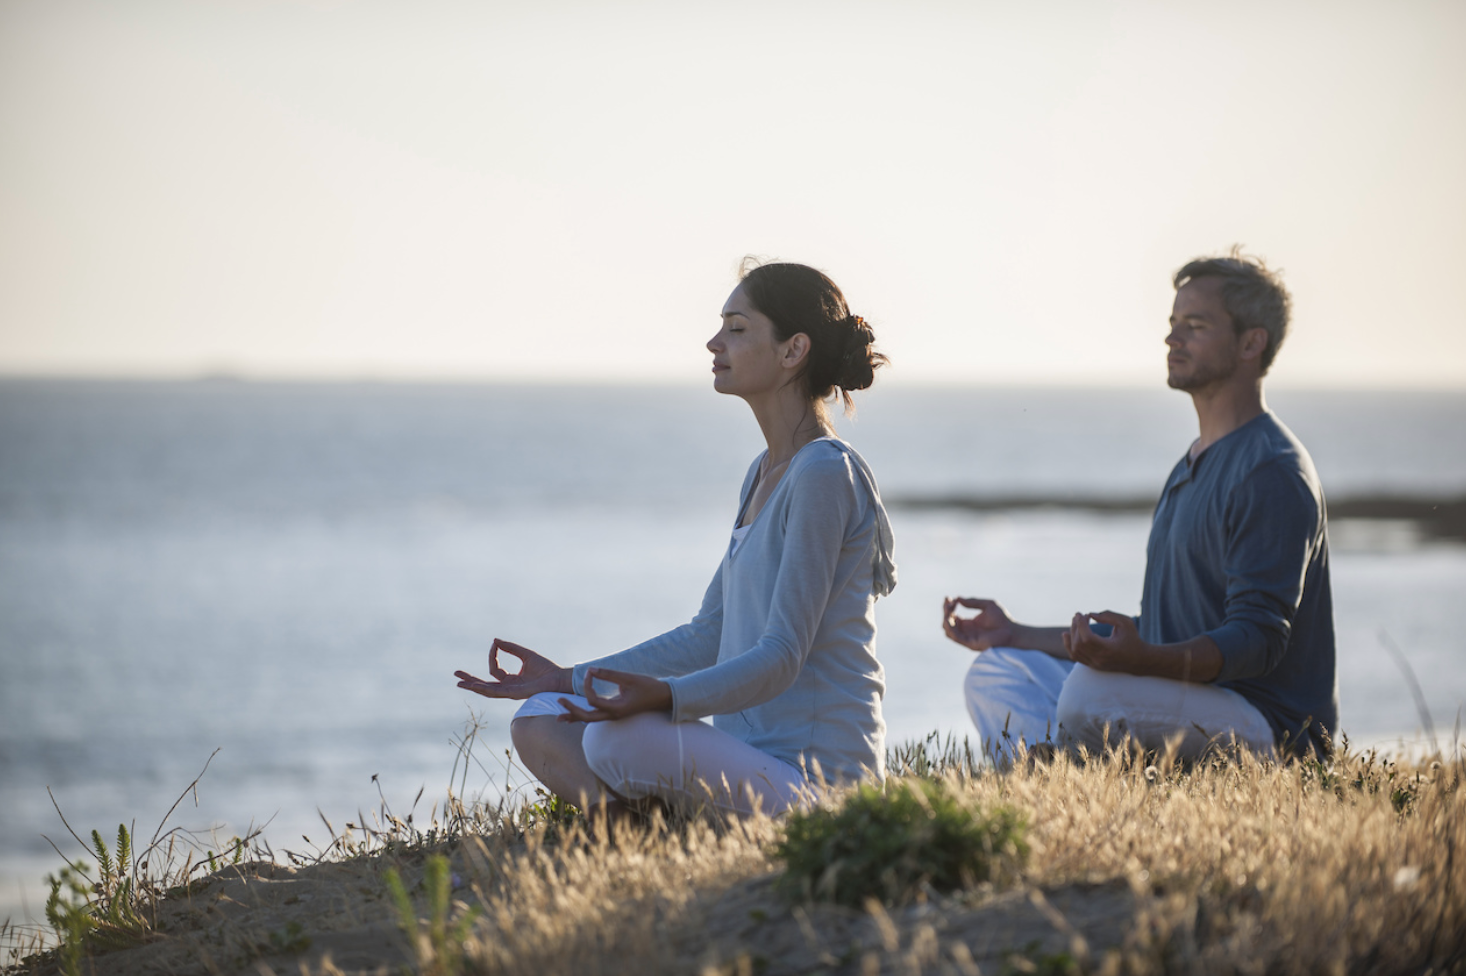 Mindfulness-Based Stress Reduction Found Effective Treating Anxiety Disorders